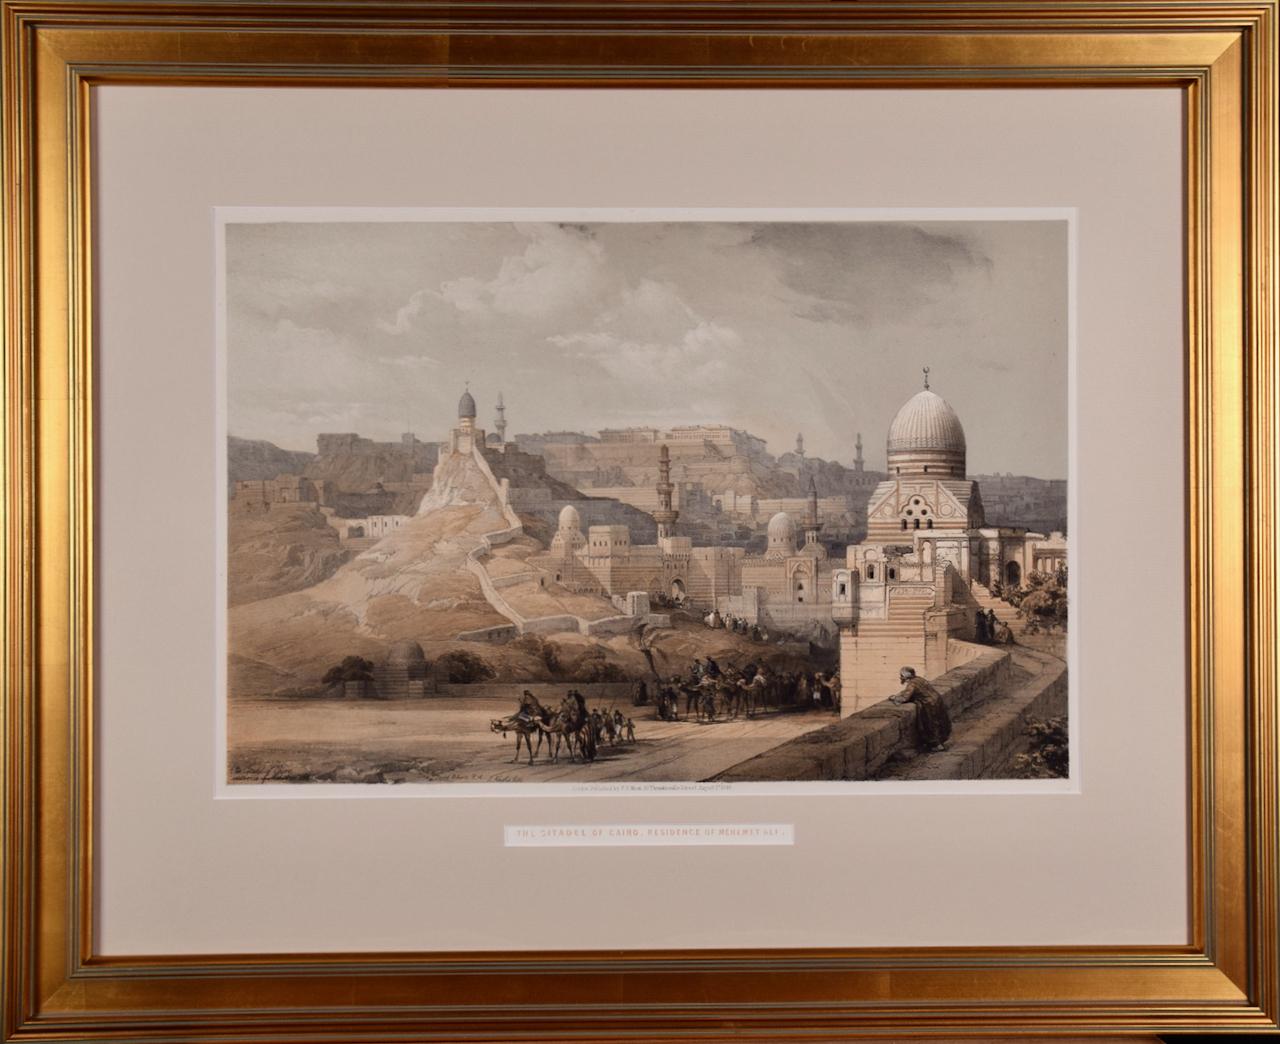 The Citadel of Cairo: 19th C. Hand-colored Roberts Lithograph